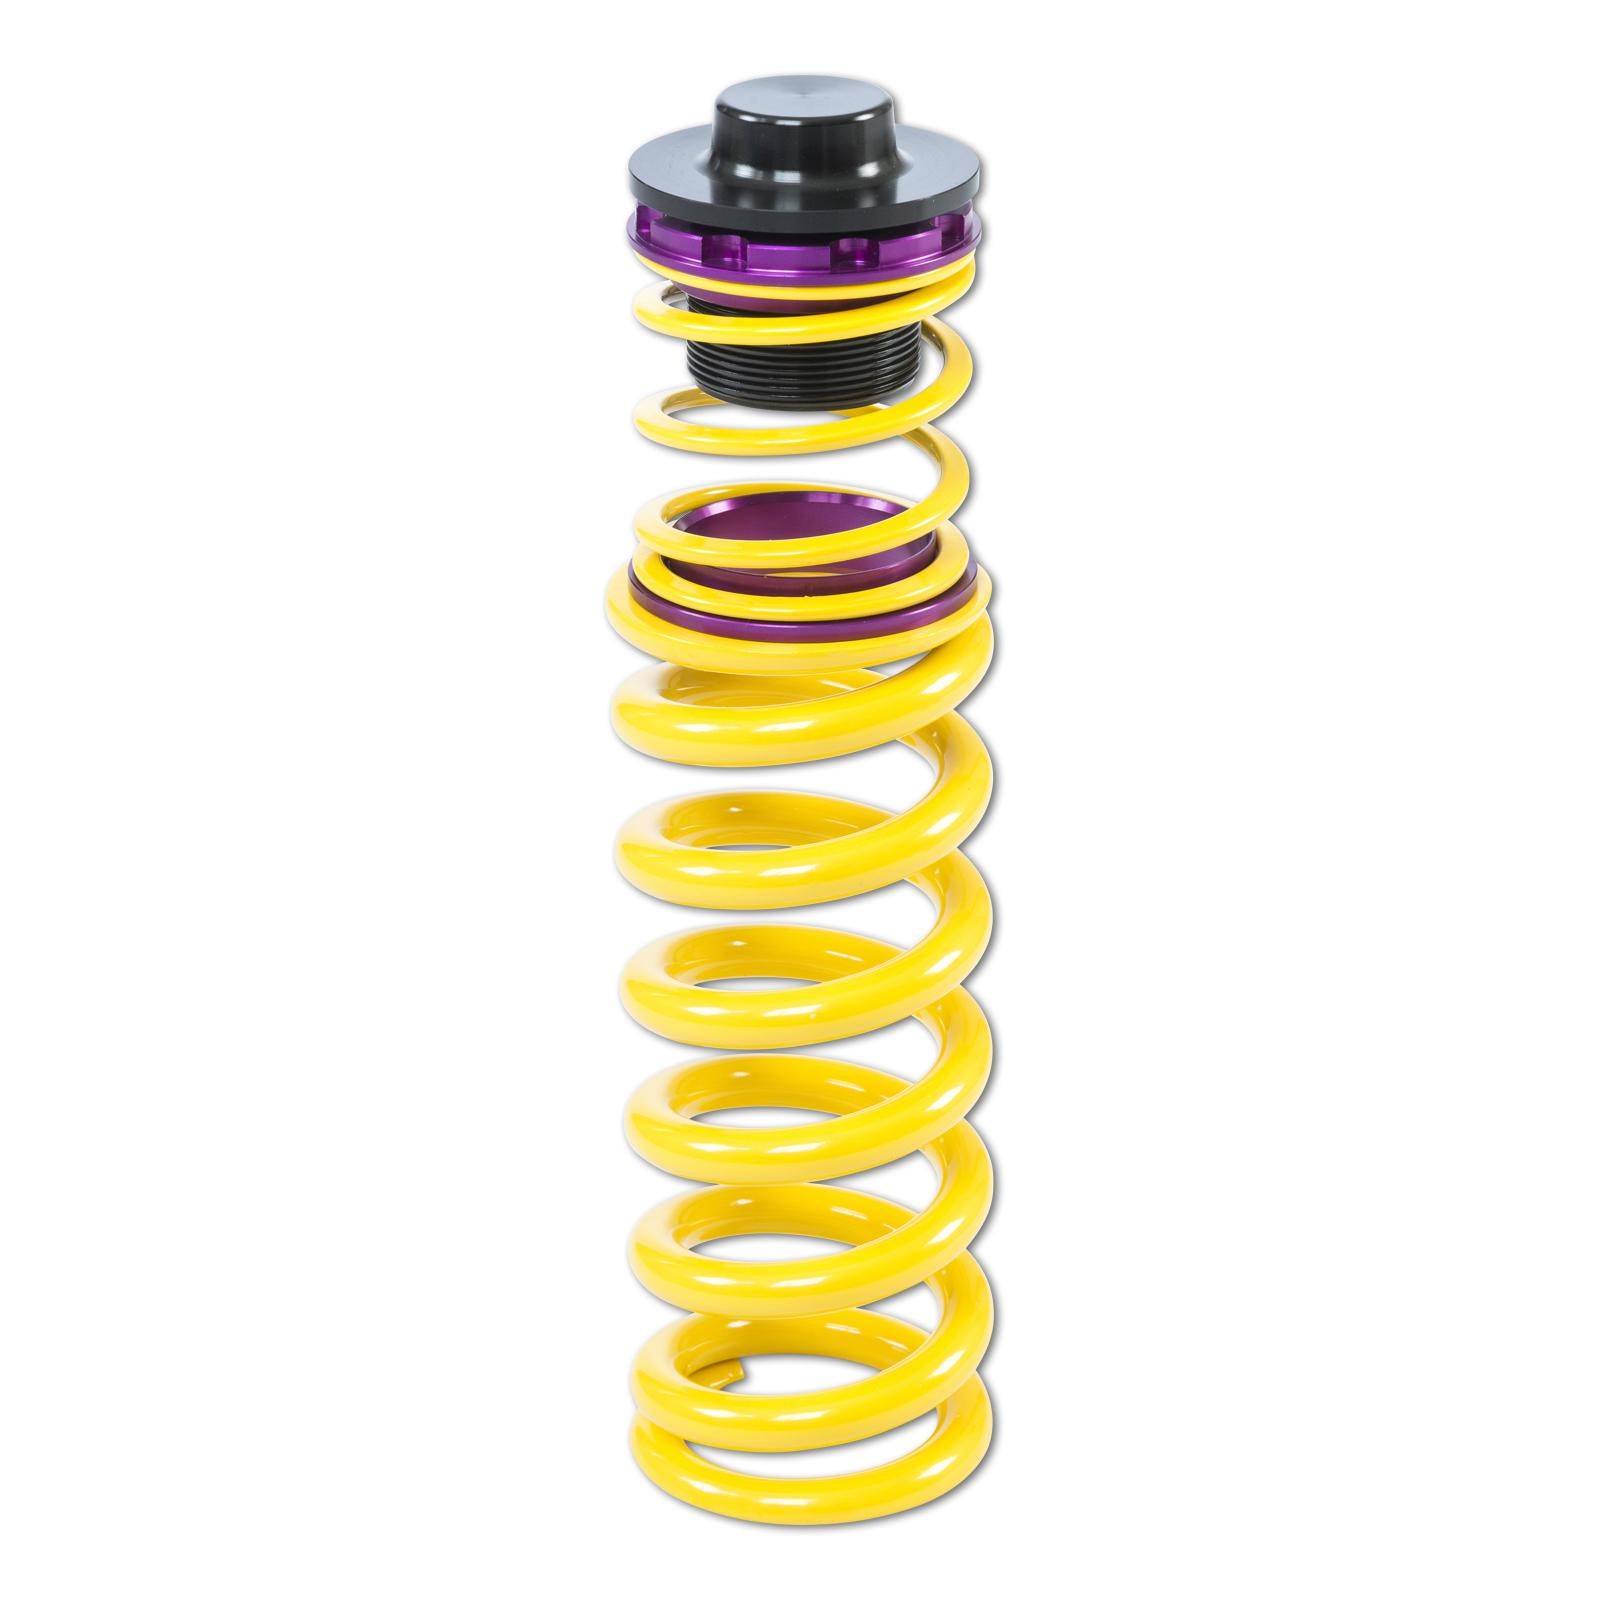 KW BMW F87 F80 F82 Height adjustable Coilover Spring Kits (M2, M3, M4) - ML Performance UK